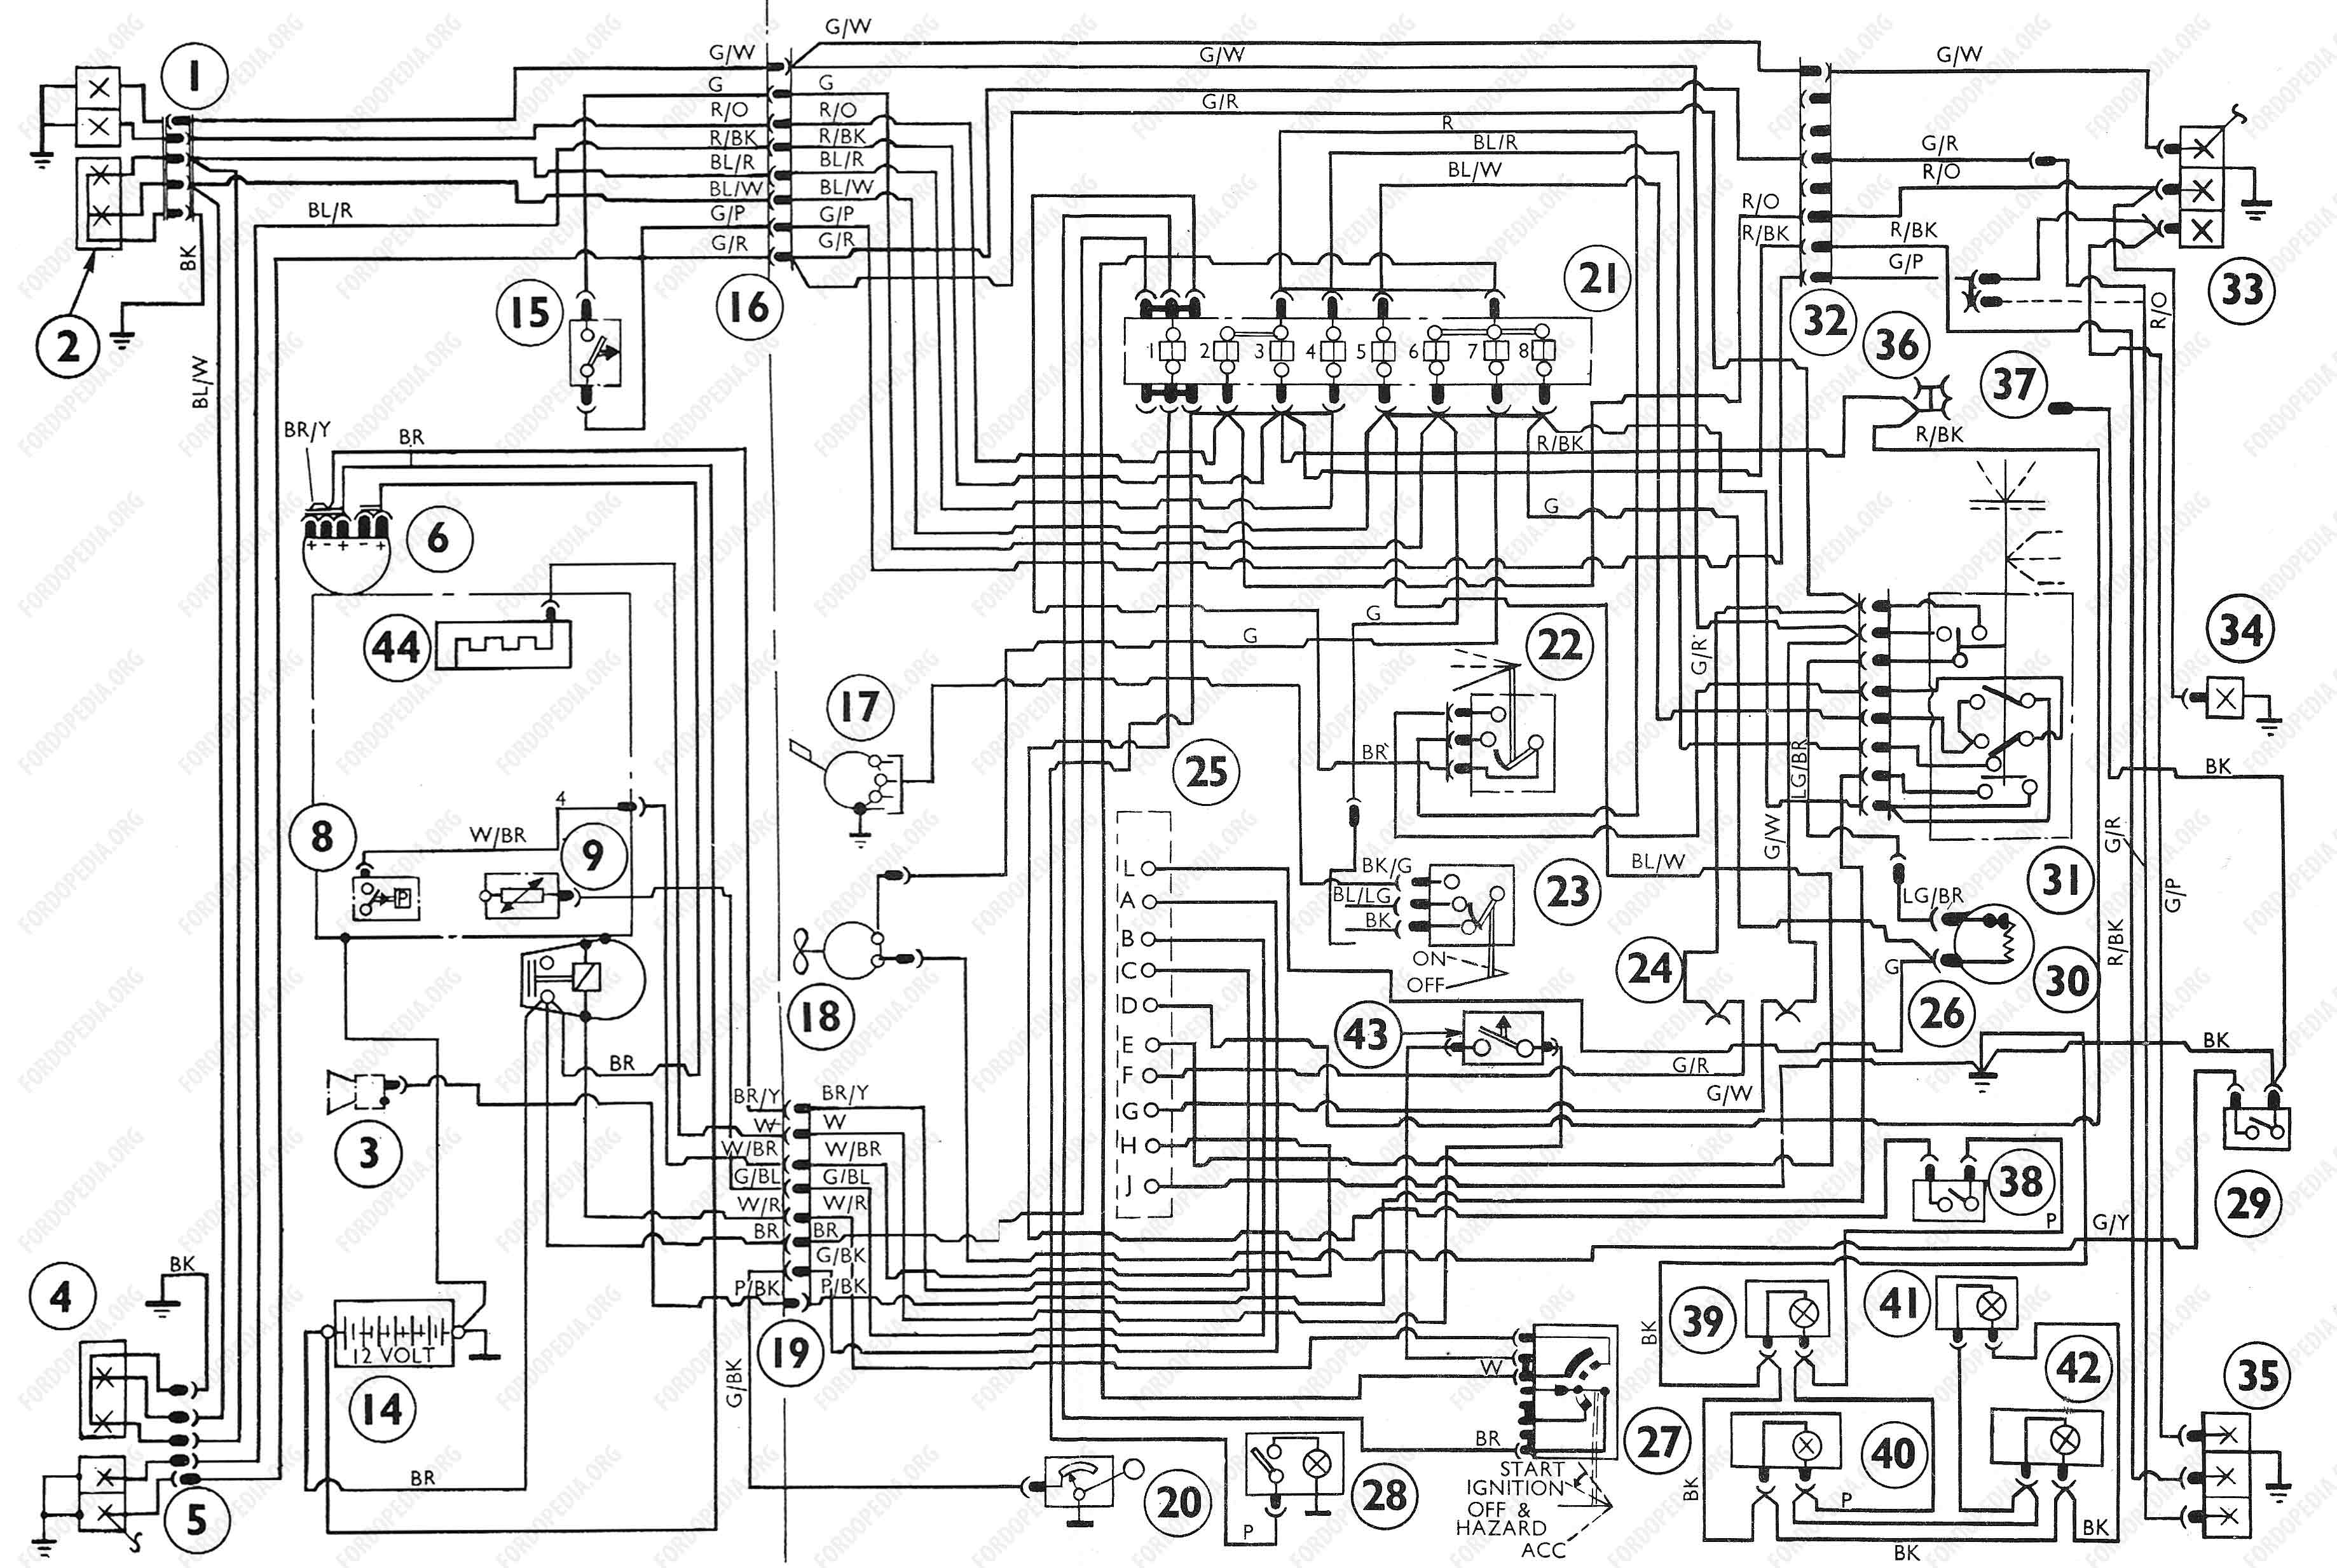 Wiring Diagram For Ford from www.fordopedia.org